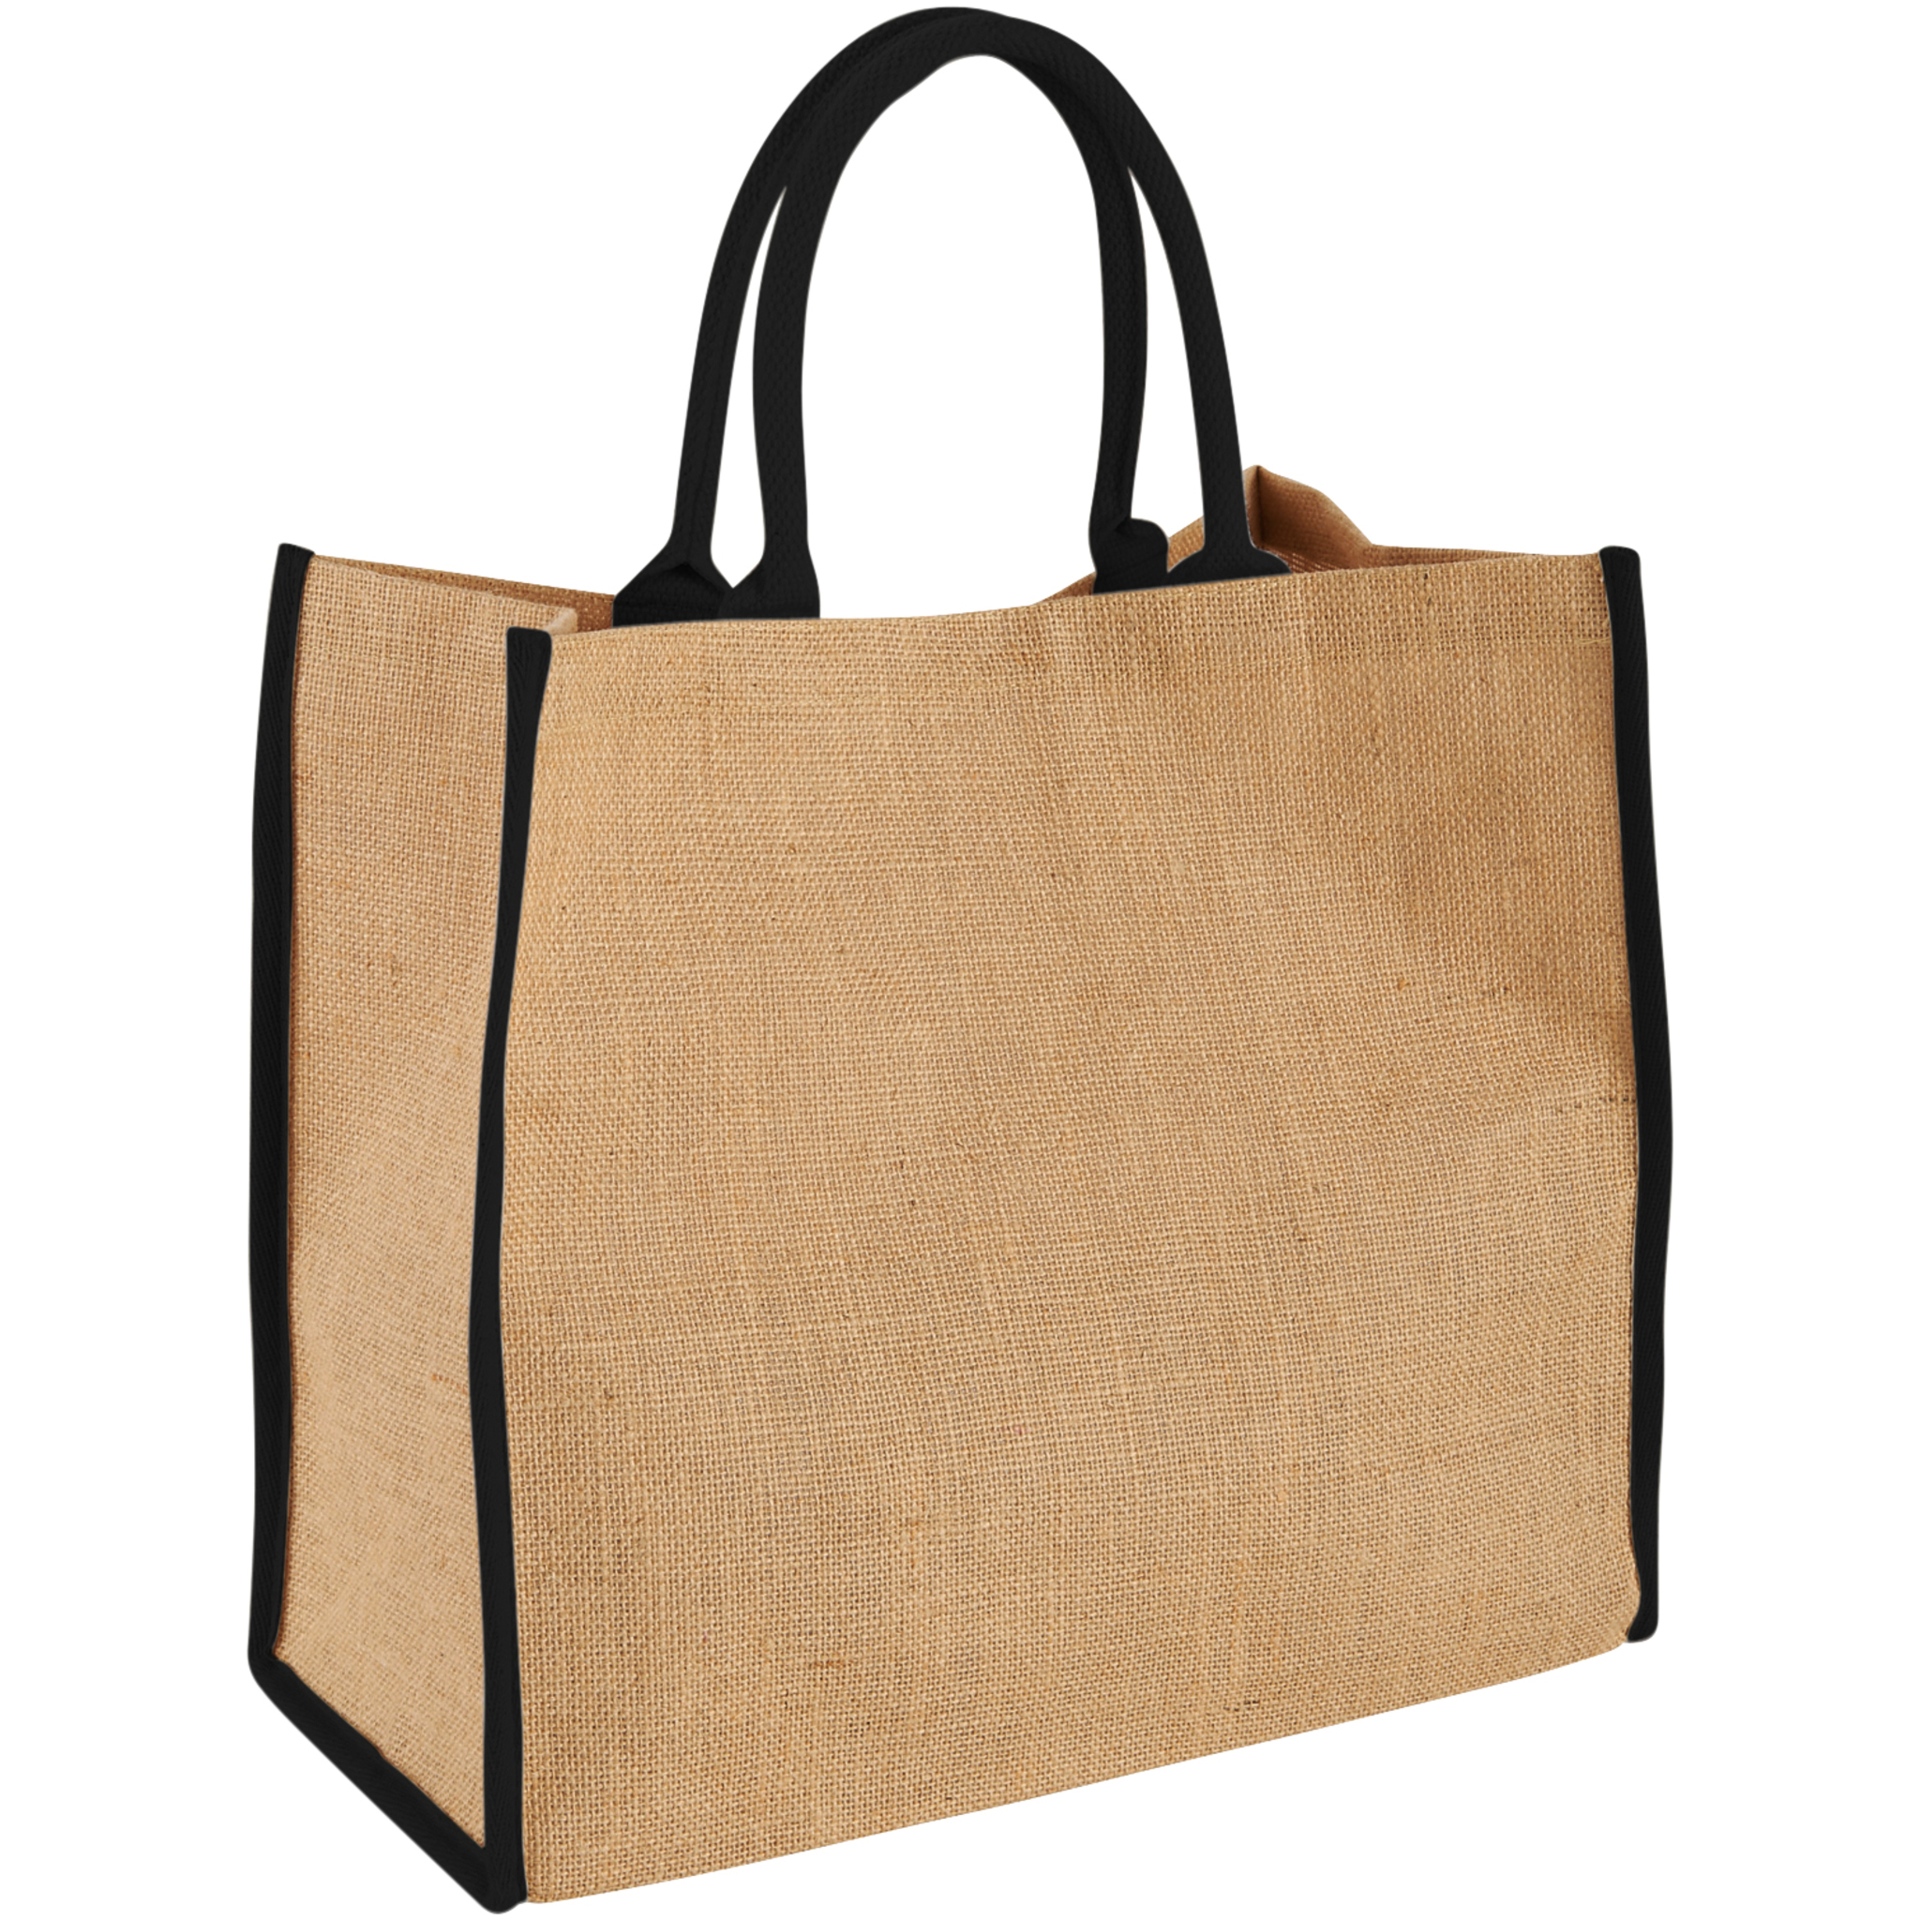 Natural shopping bag in jute fabric with black short handles and piping